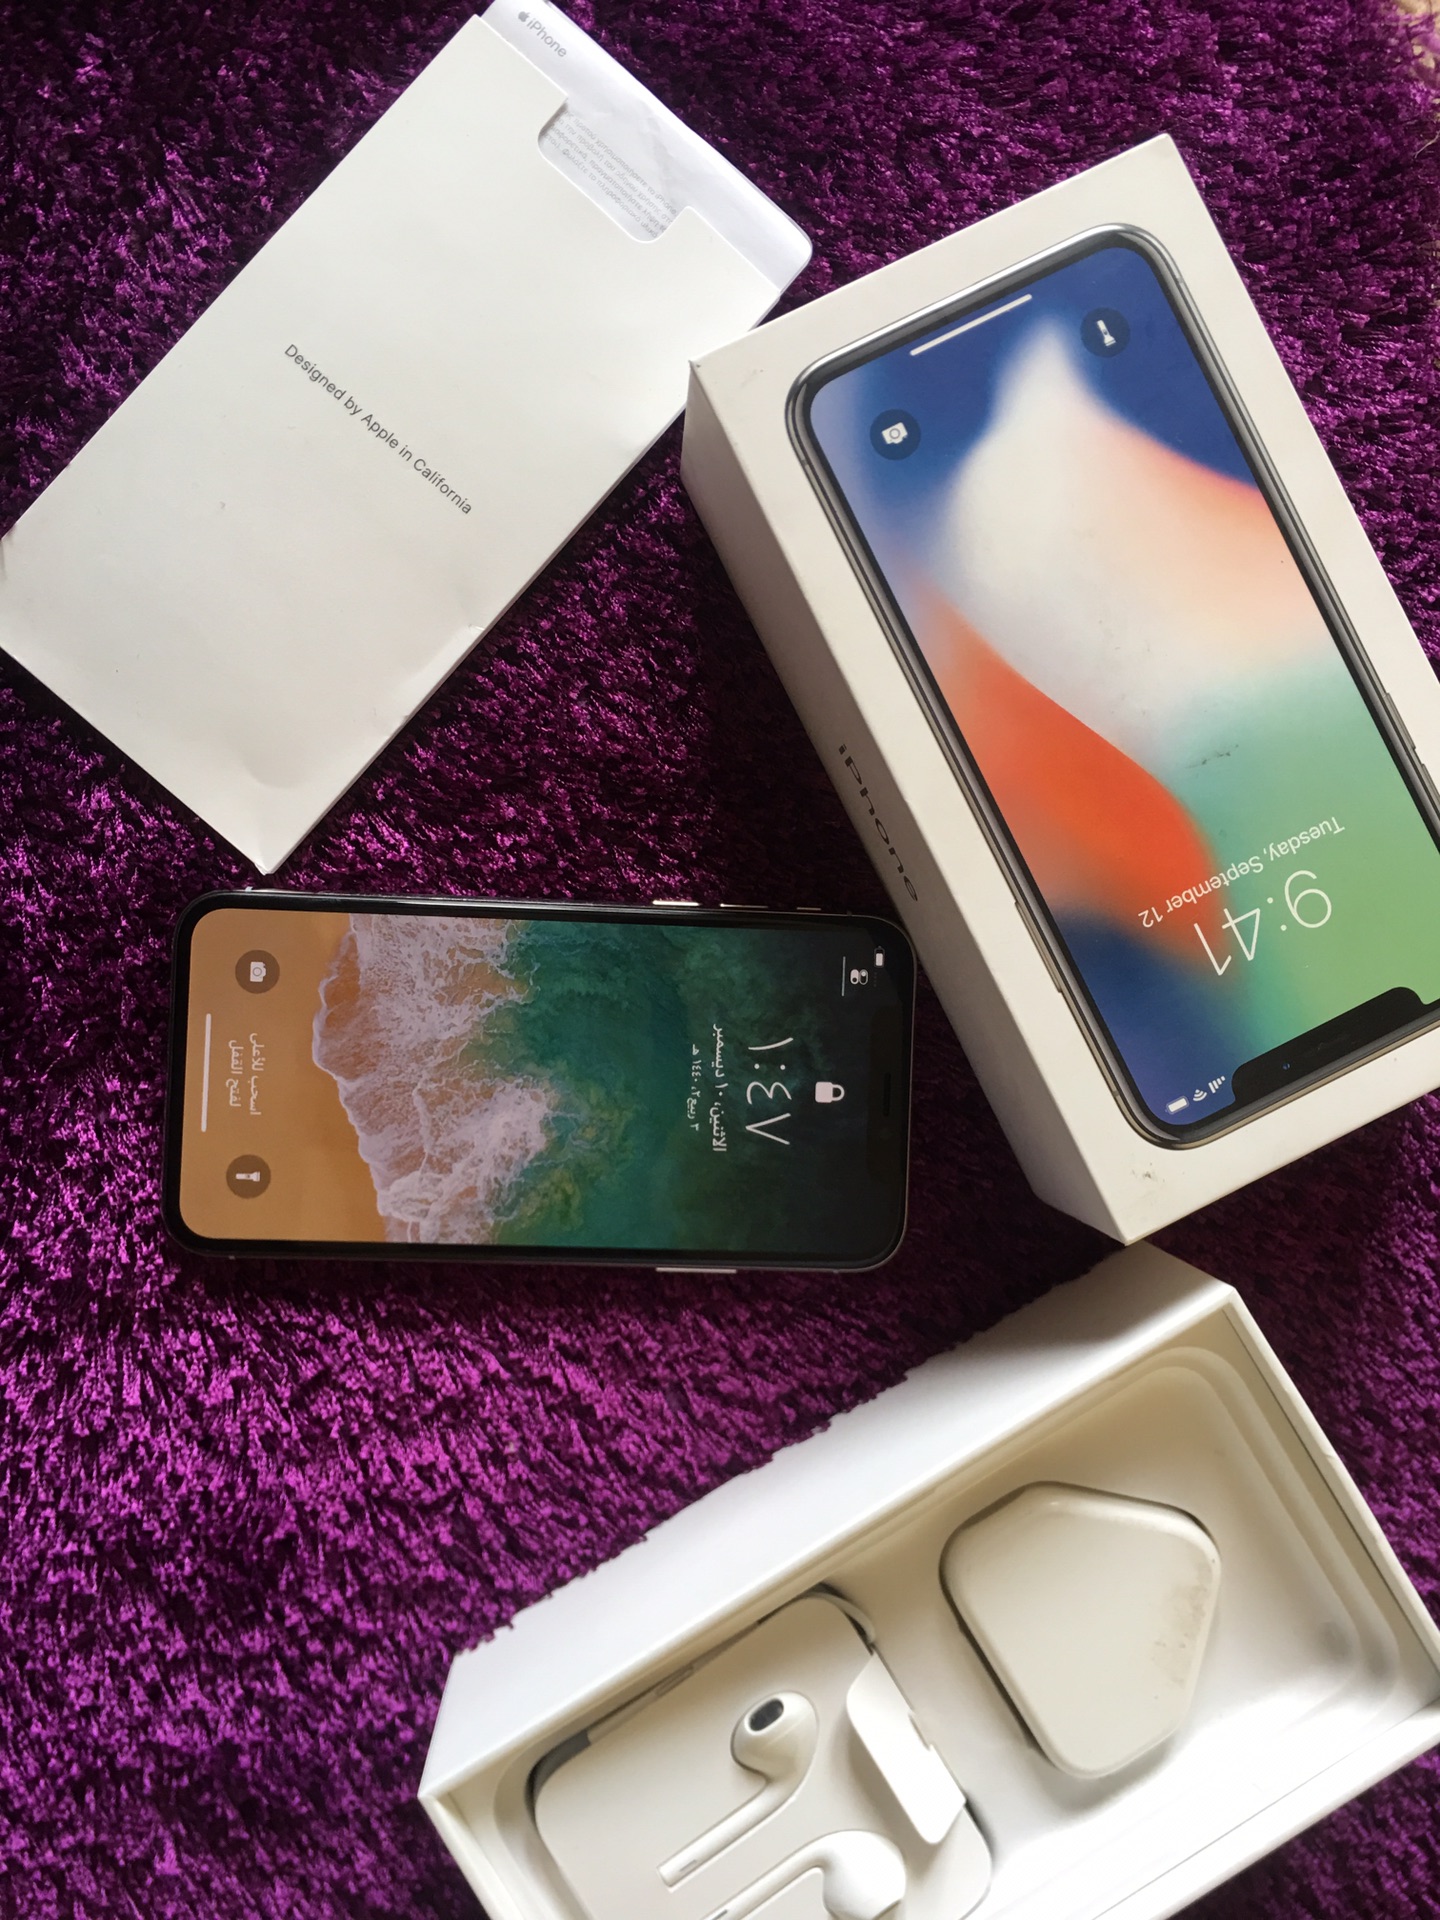 Assalaamu Alaikkum Brother,Sister All products are brand new, unlocked sealed in box comes with 1 year international warranty and also 6 months return policy - -  iPhone x 256G لا تنسَ أنك...